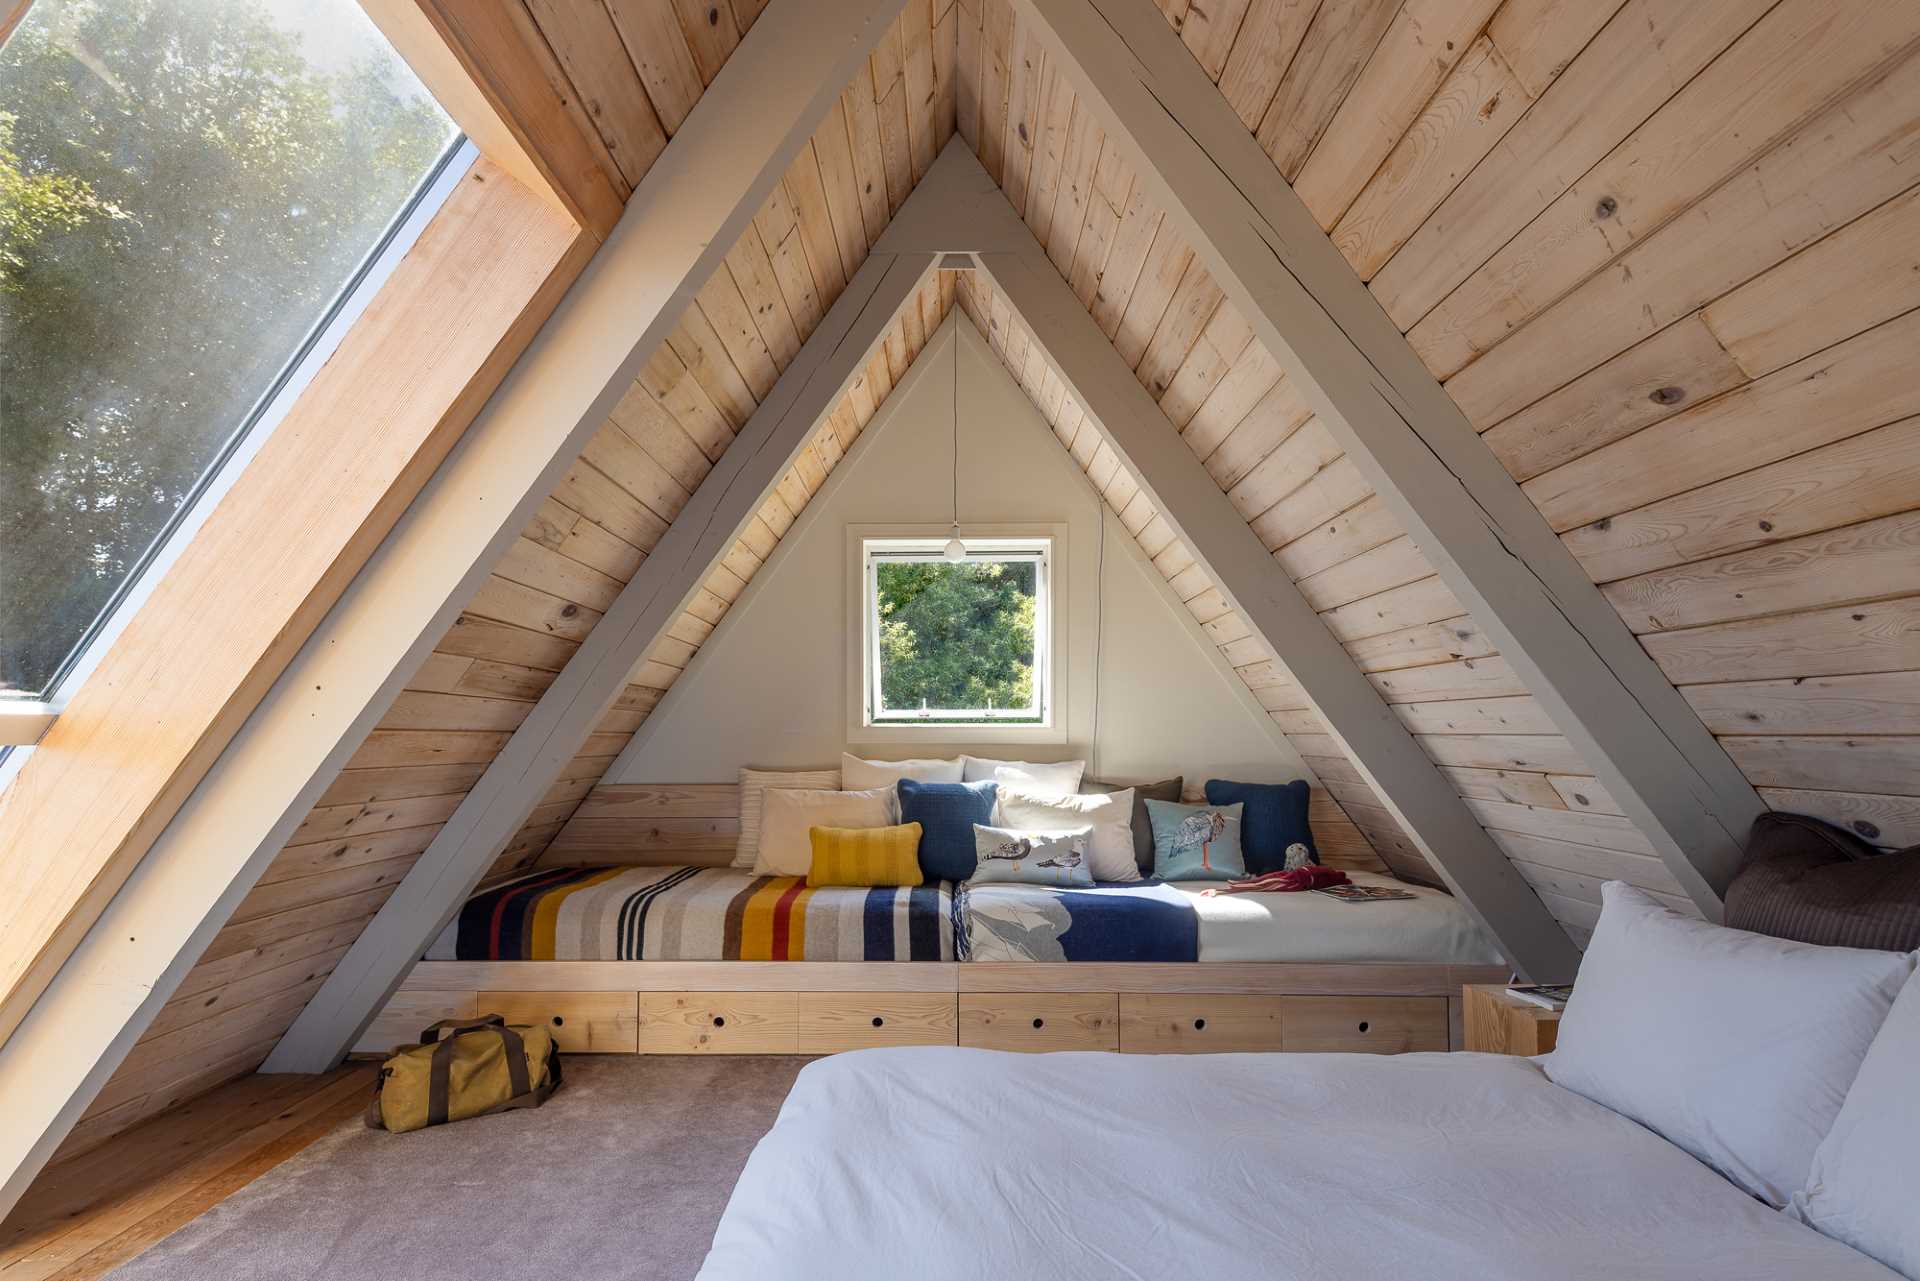 This bedroom in an A-Frame home includes a freestanding bed as well as built-in beds.